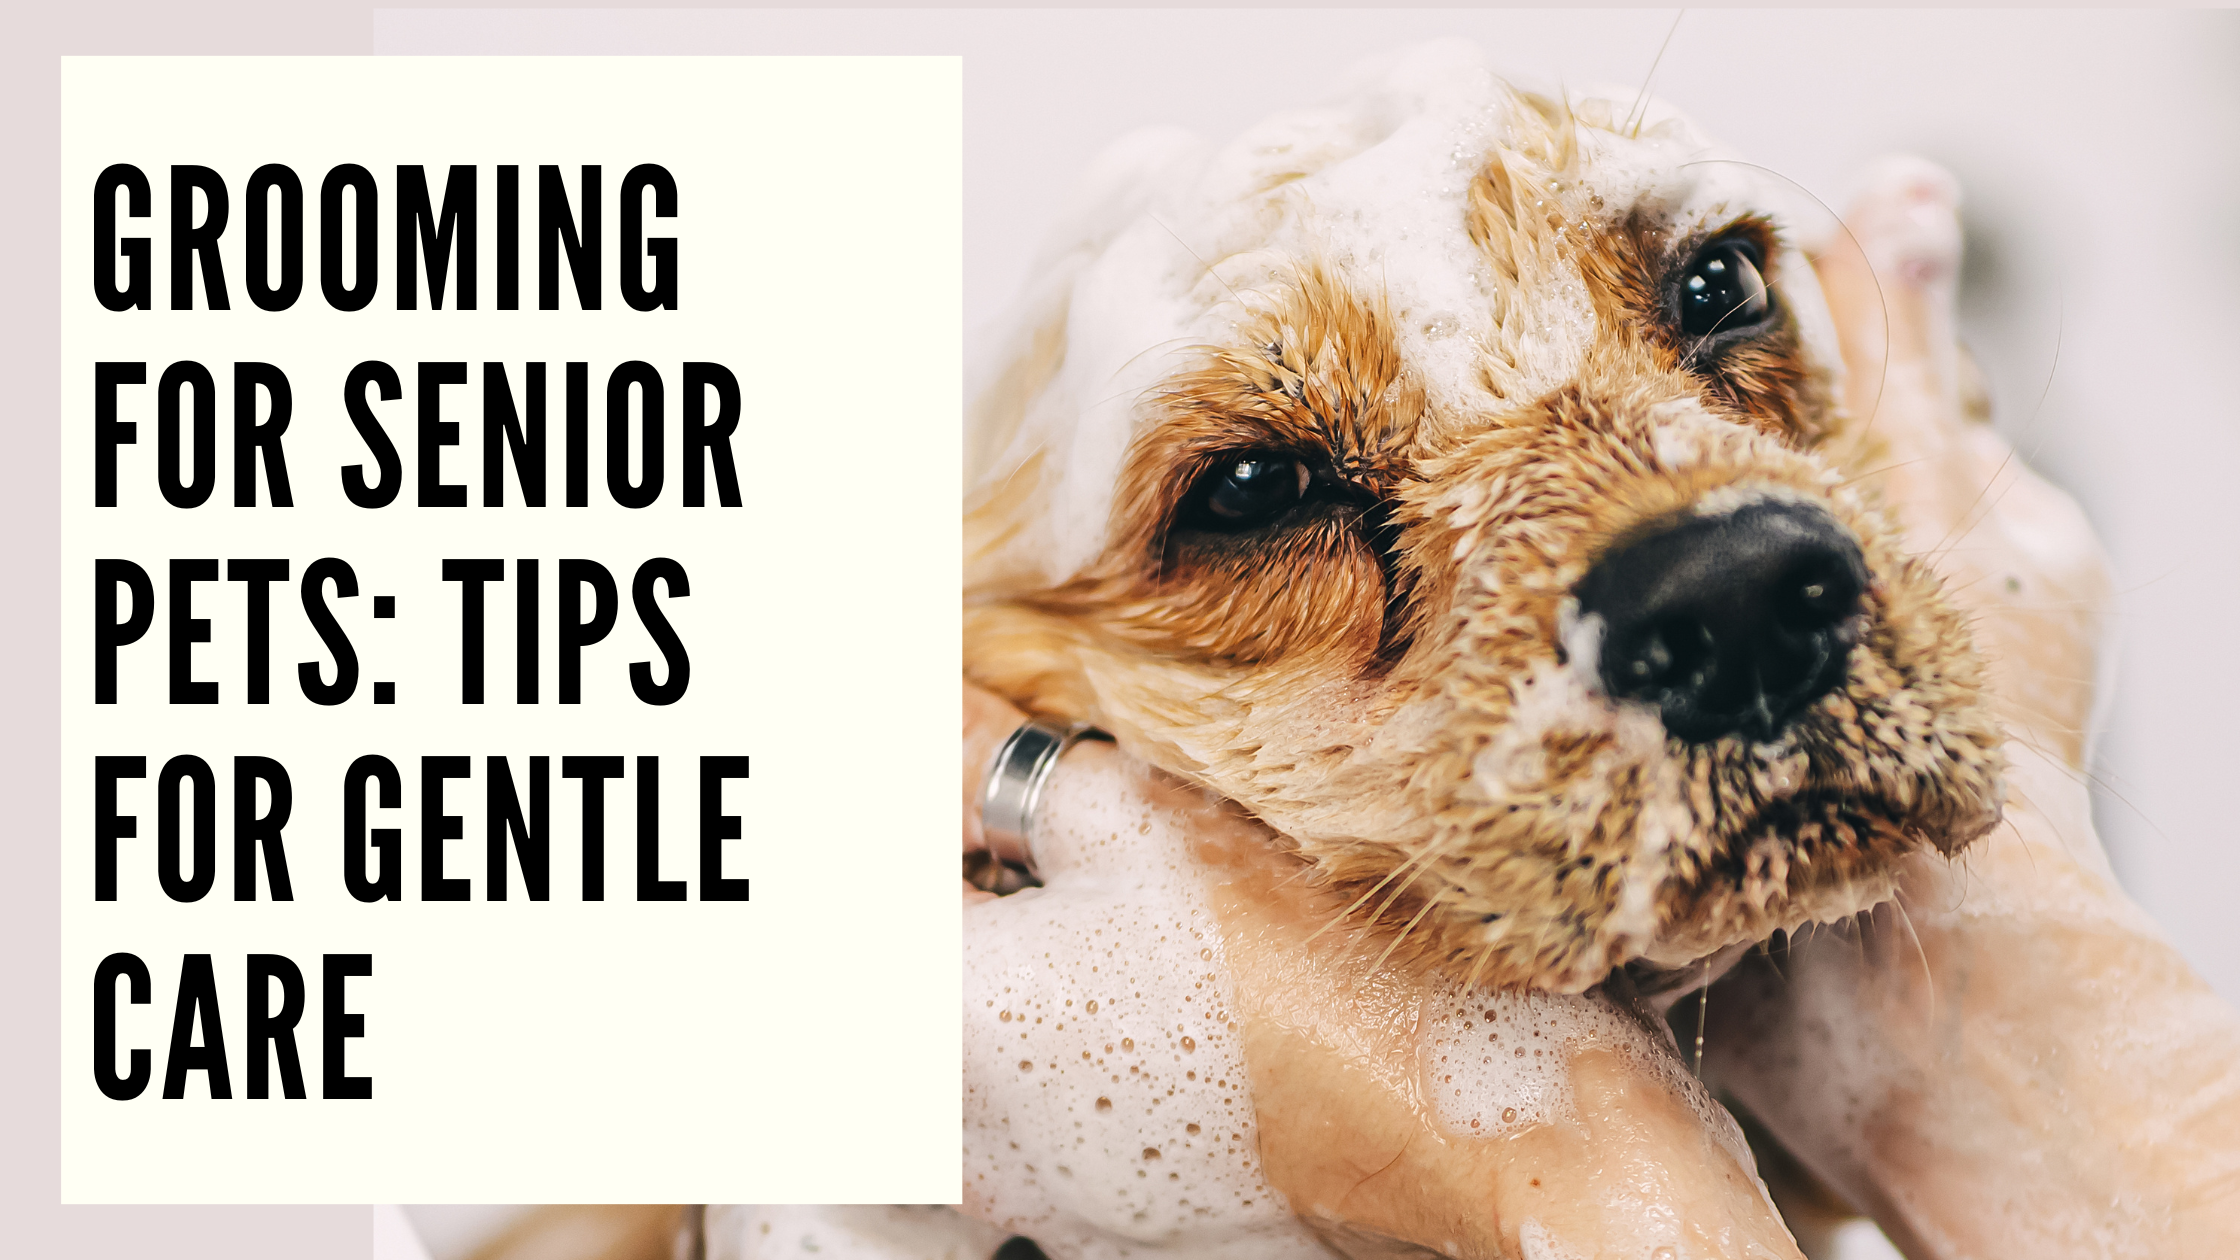 Grooming for Senior Pets Tips for Gentle Care